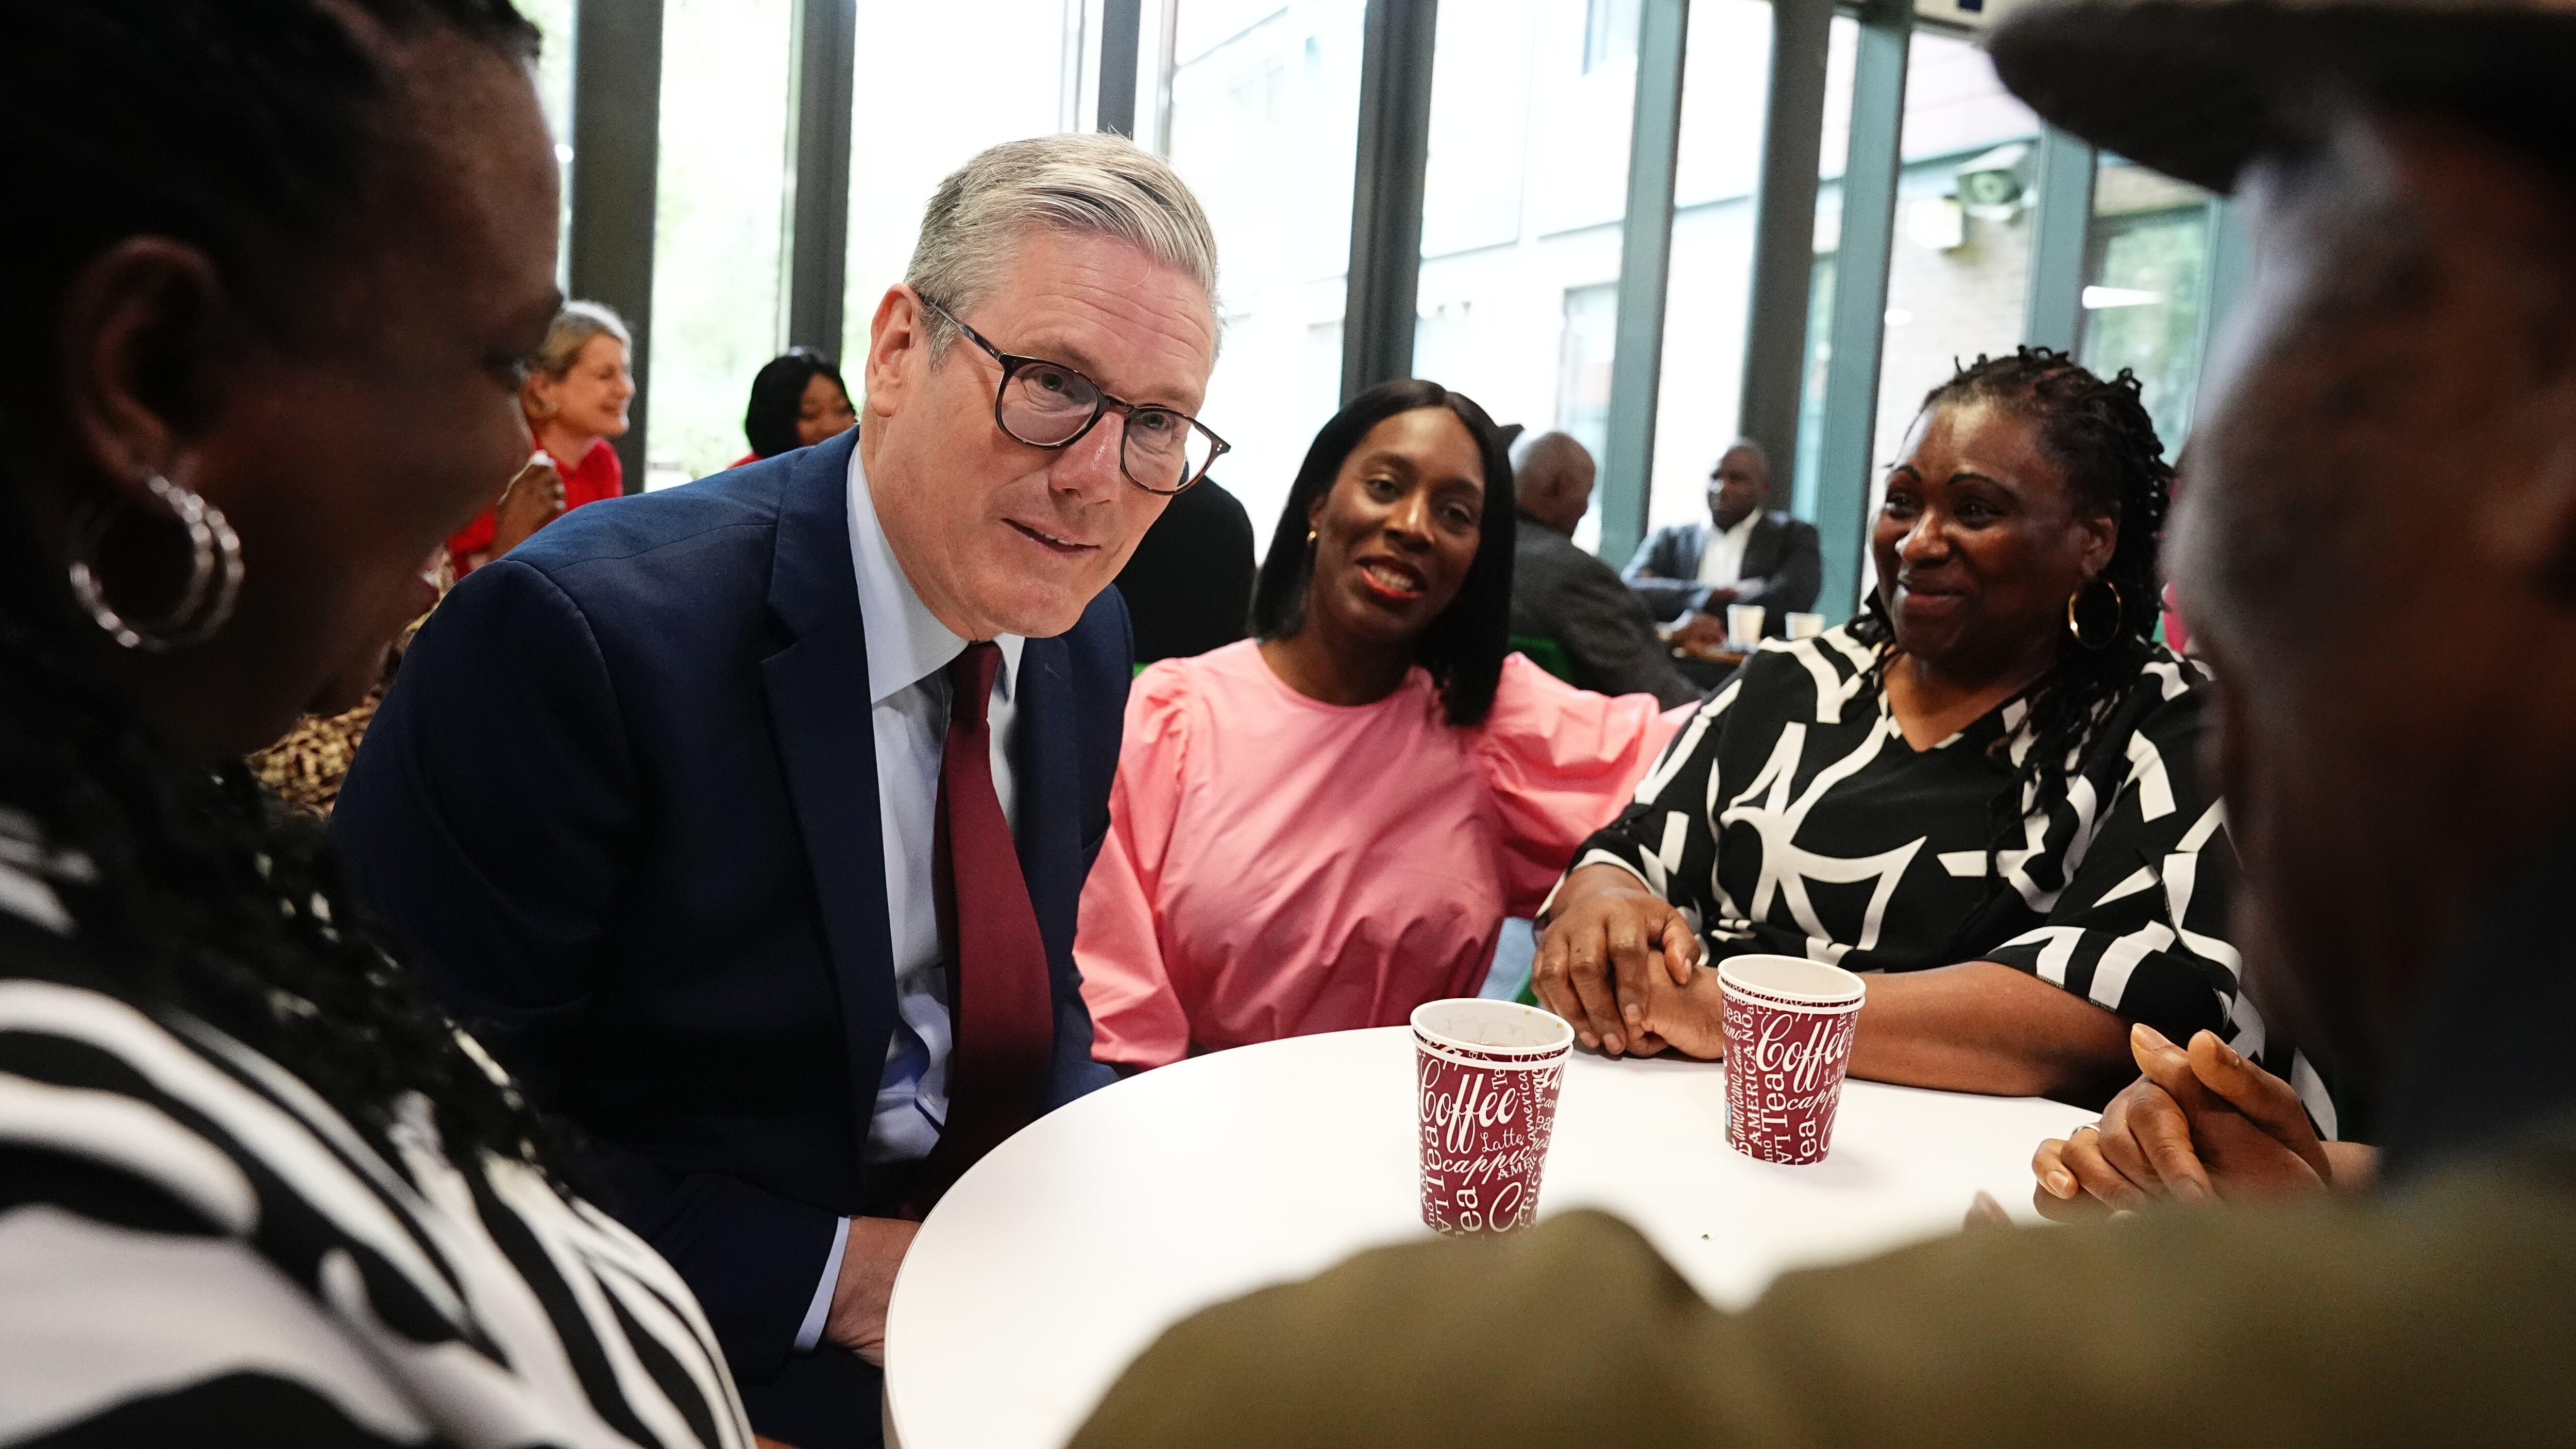 Labour Party leader Sir Keir Starmer attends a coffee morning with members of the Windrush generation